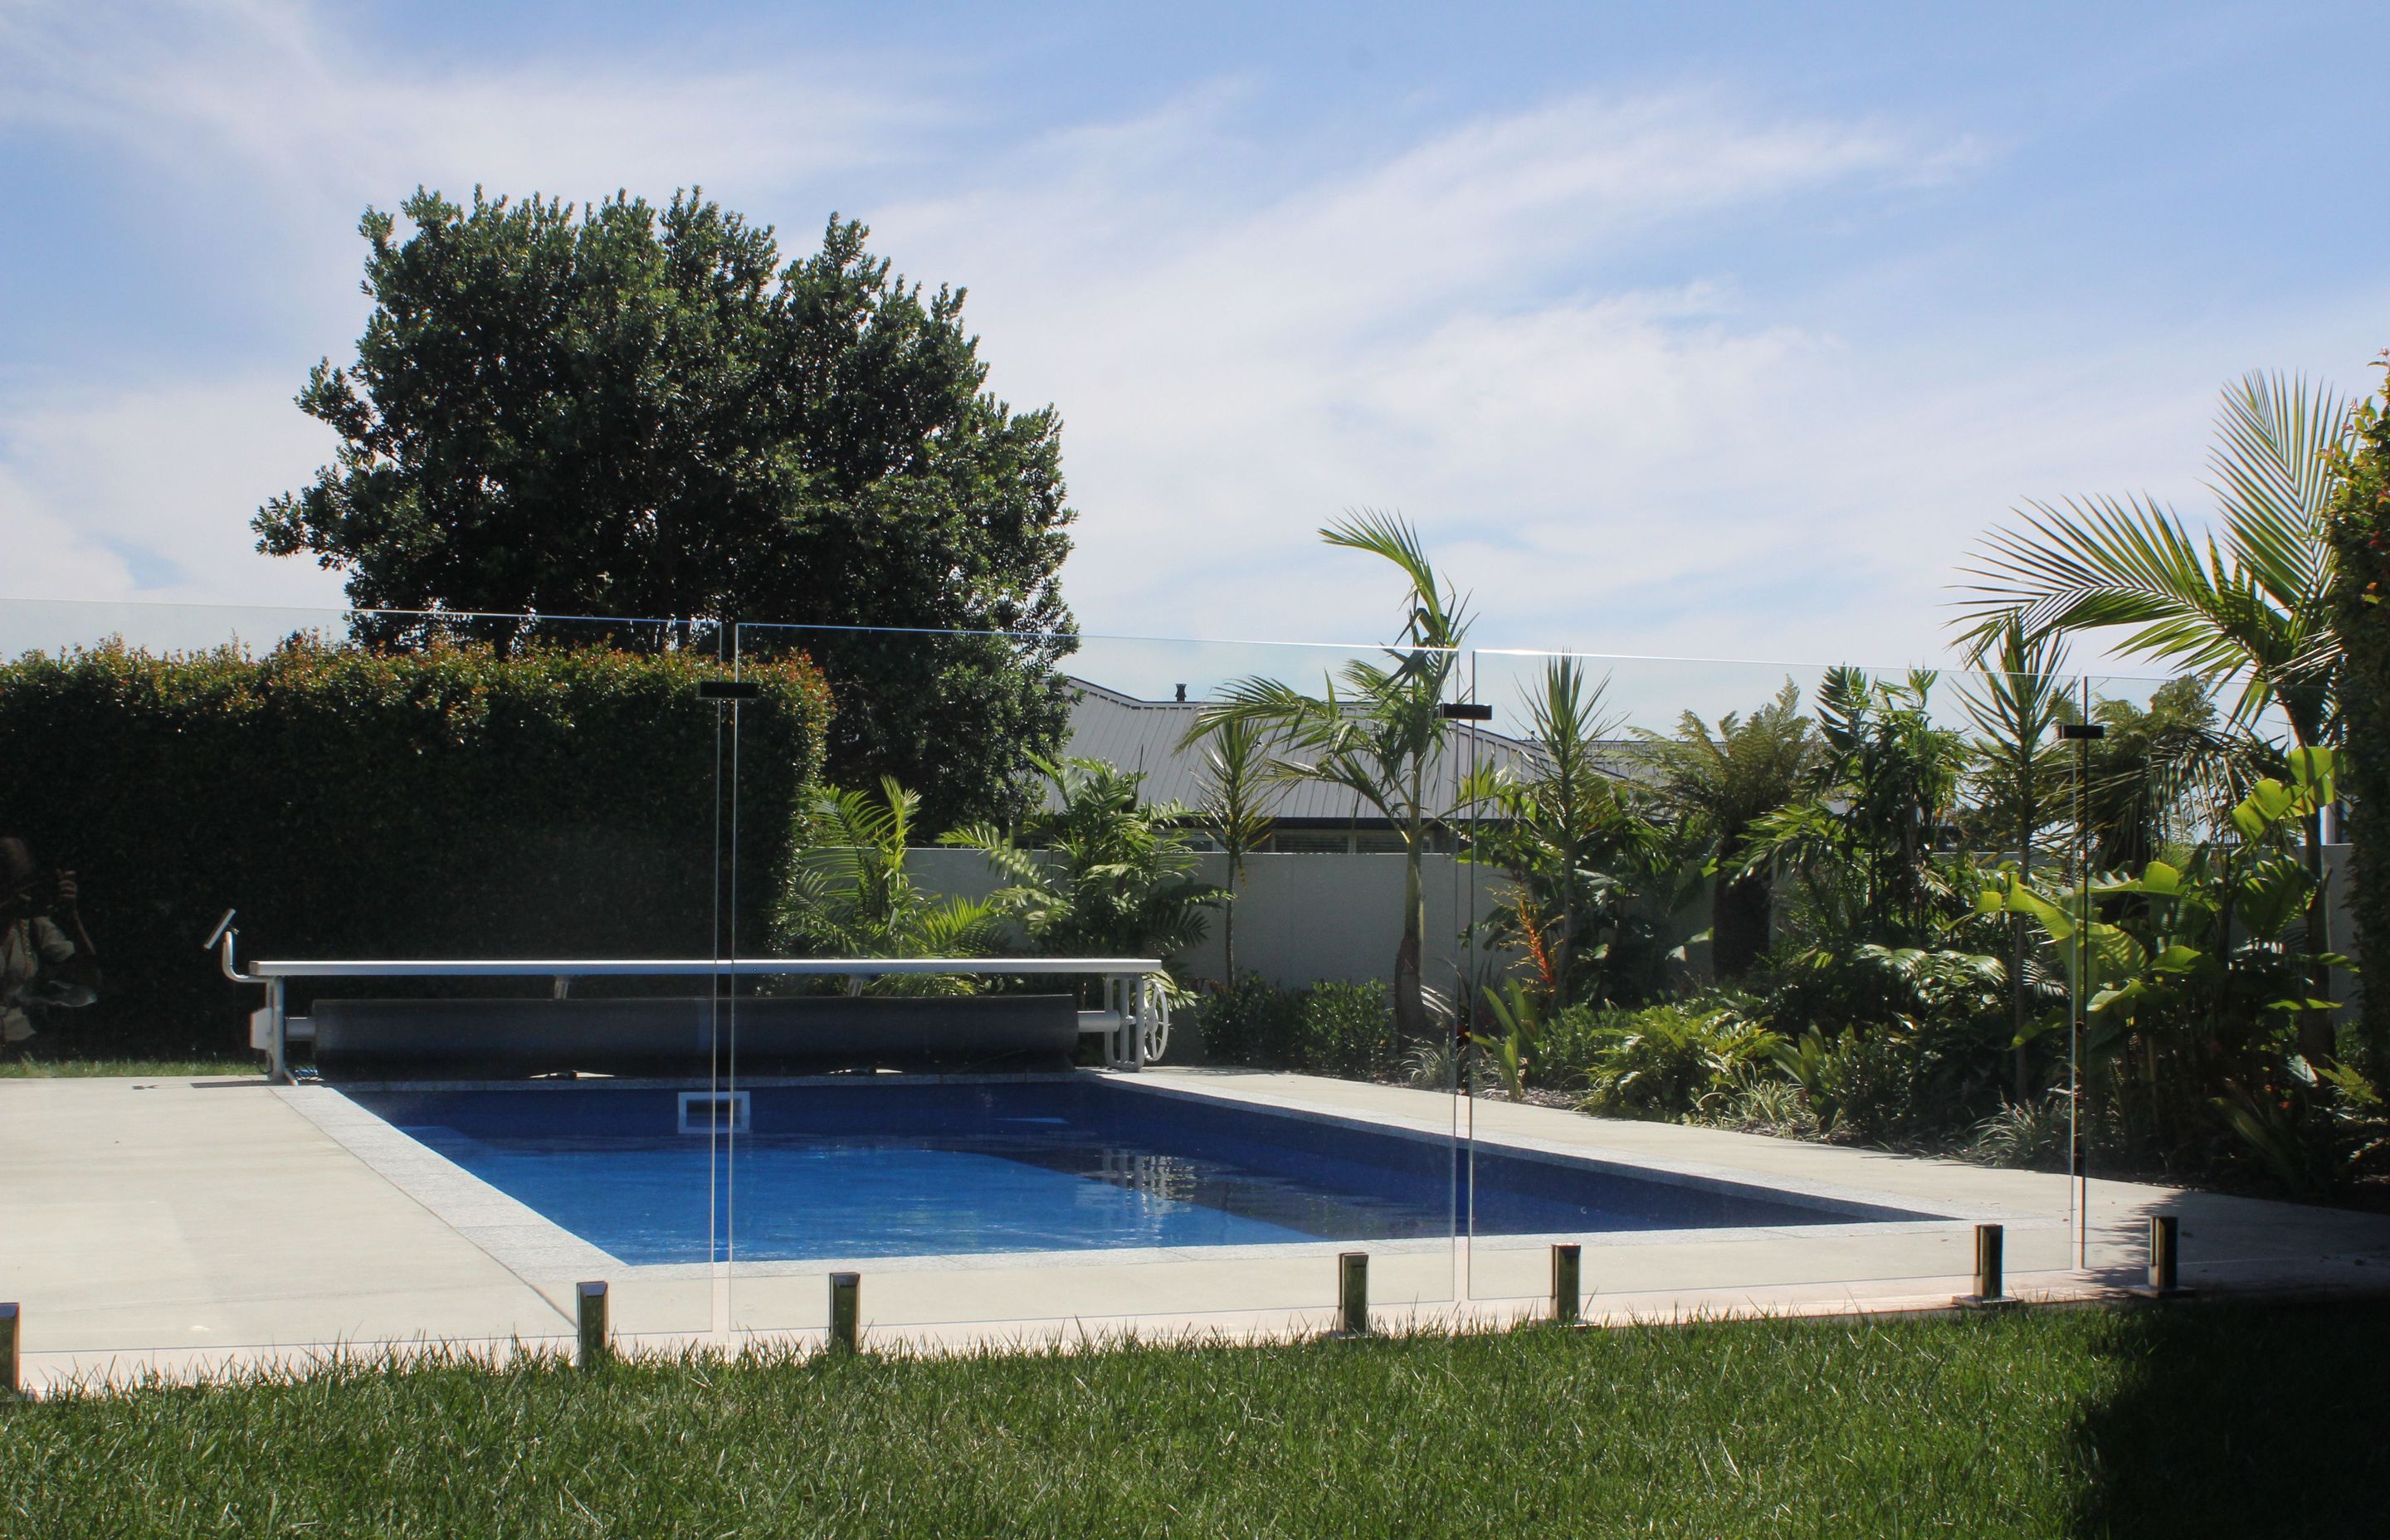 A stunning in-ground pool with retractable cover by Poolpac in Papamoa, Bay of Plenty.